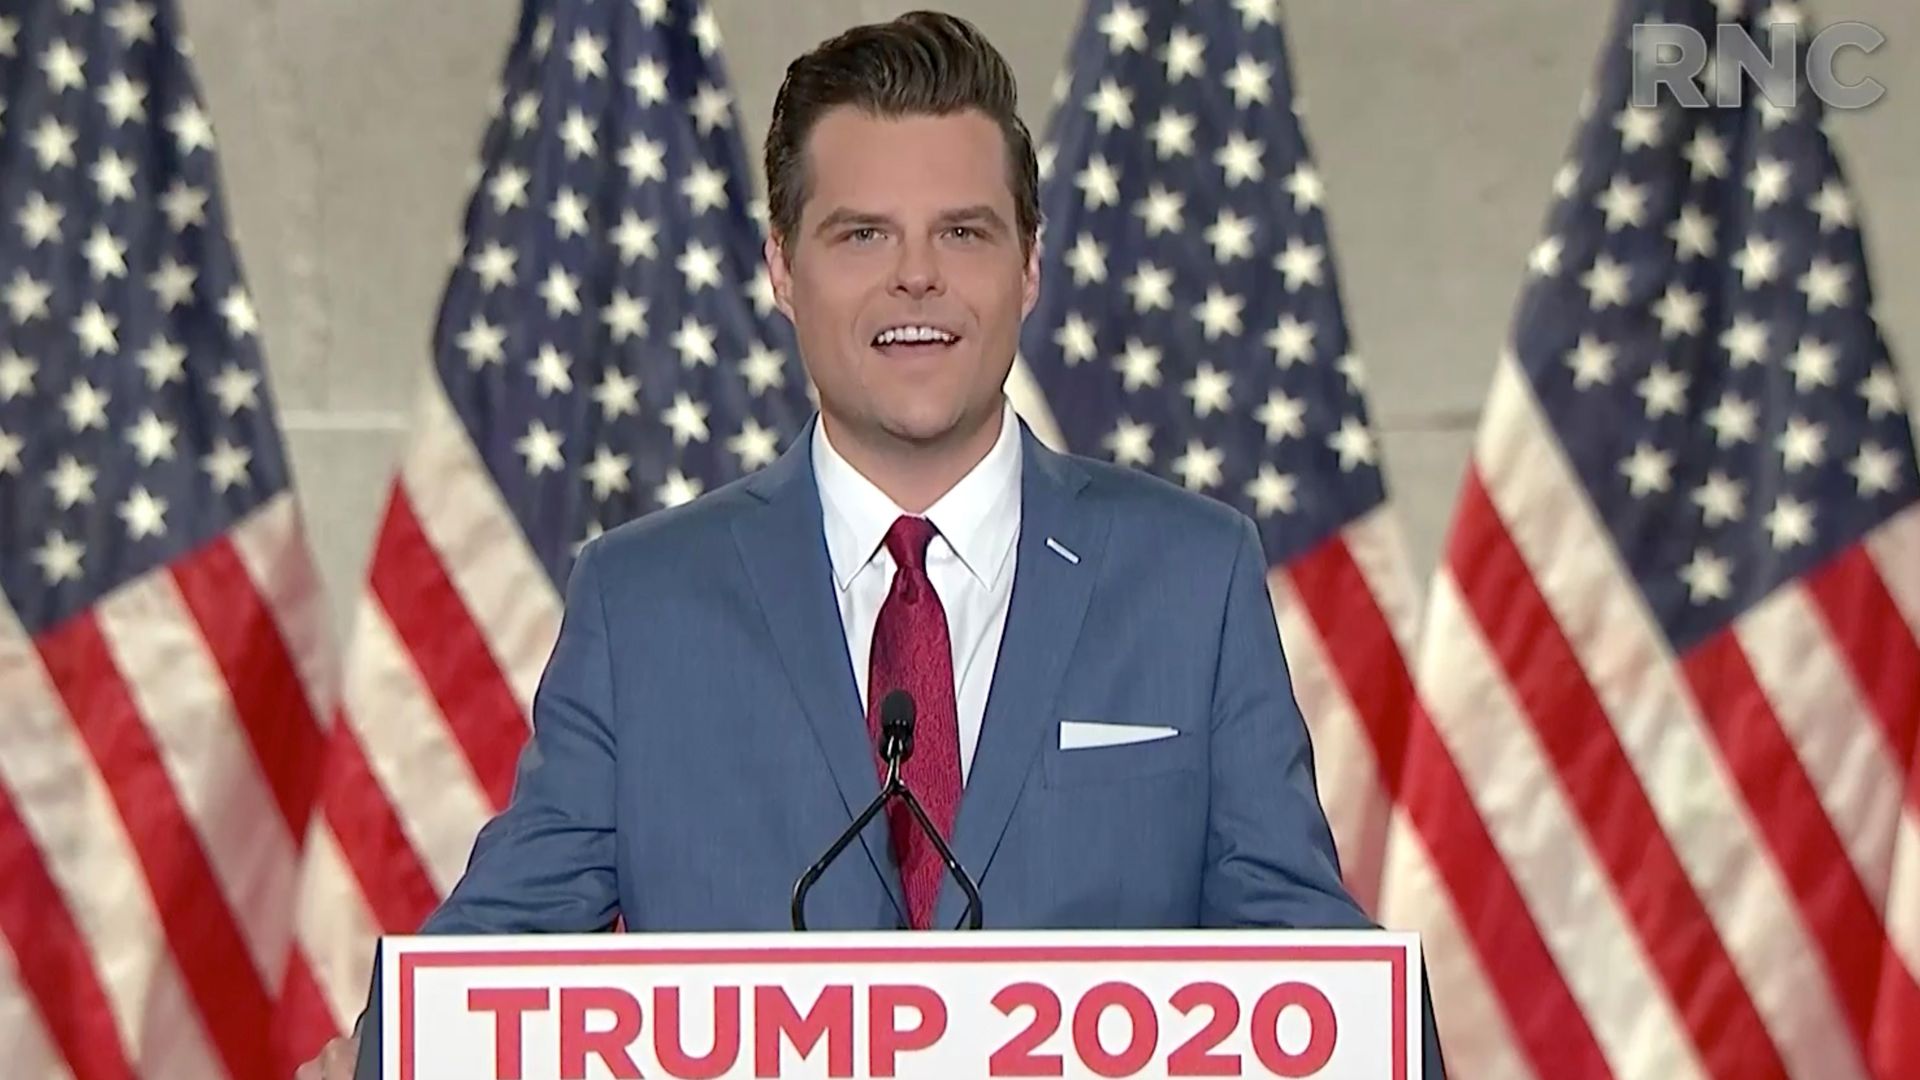 In this screenshot from the RNC’s livestream of the 2020 Republican National Convention, U.S. Rep. Matt Gaetz (R-FL) addresses the virtual convention 